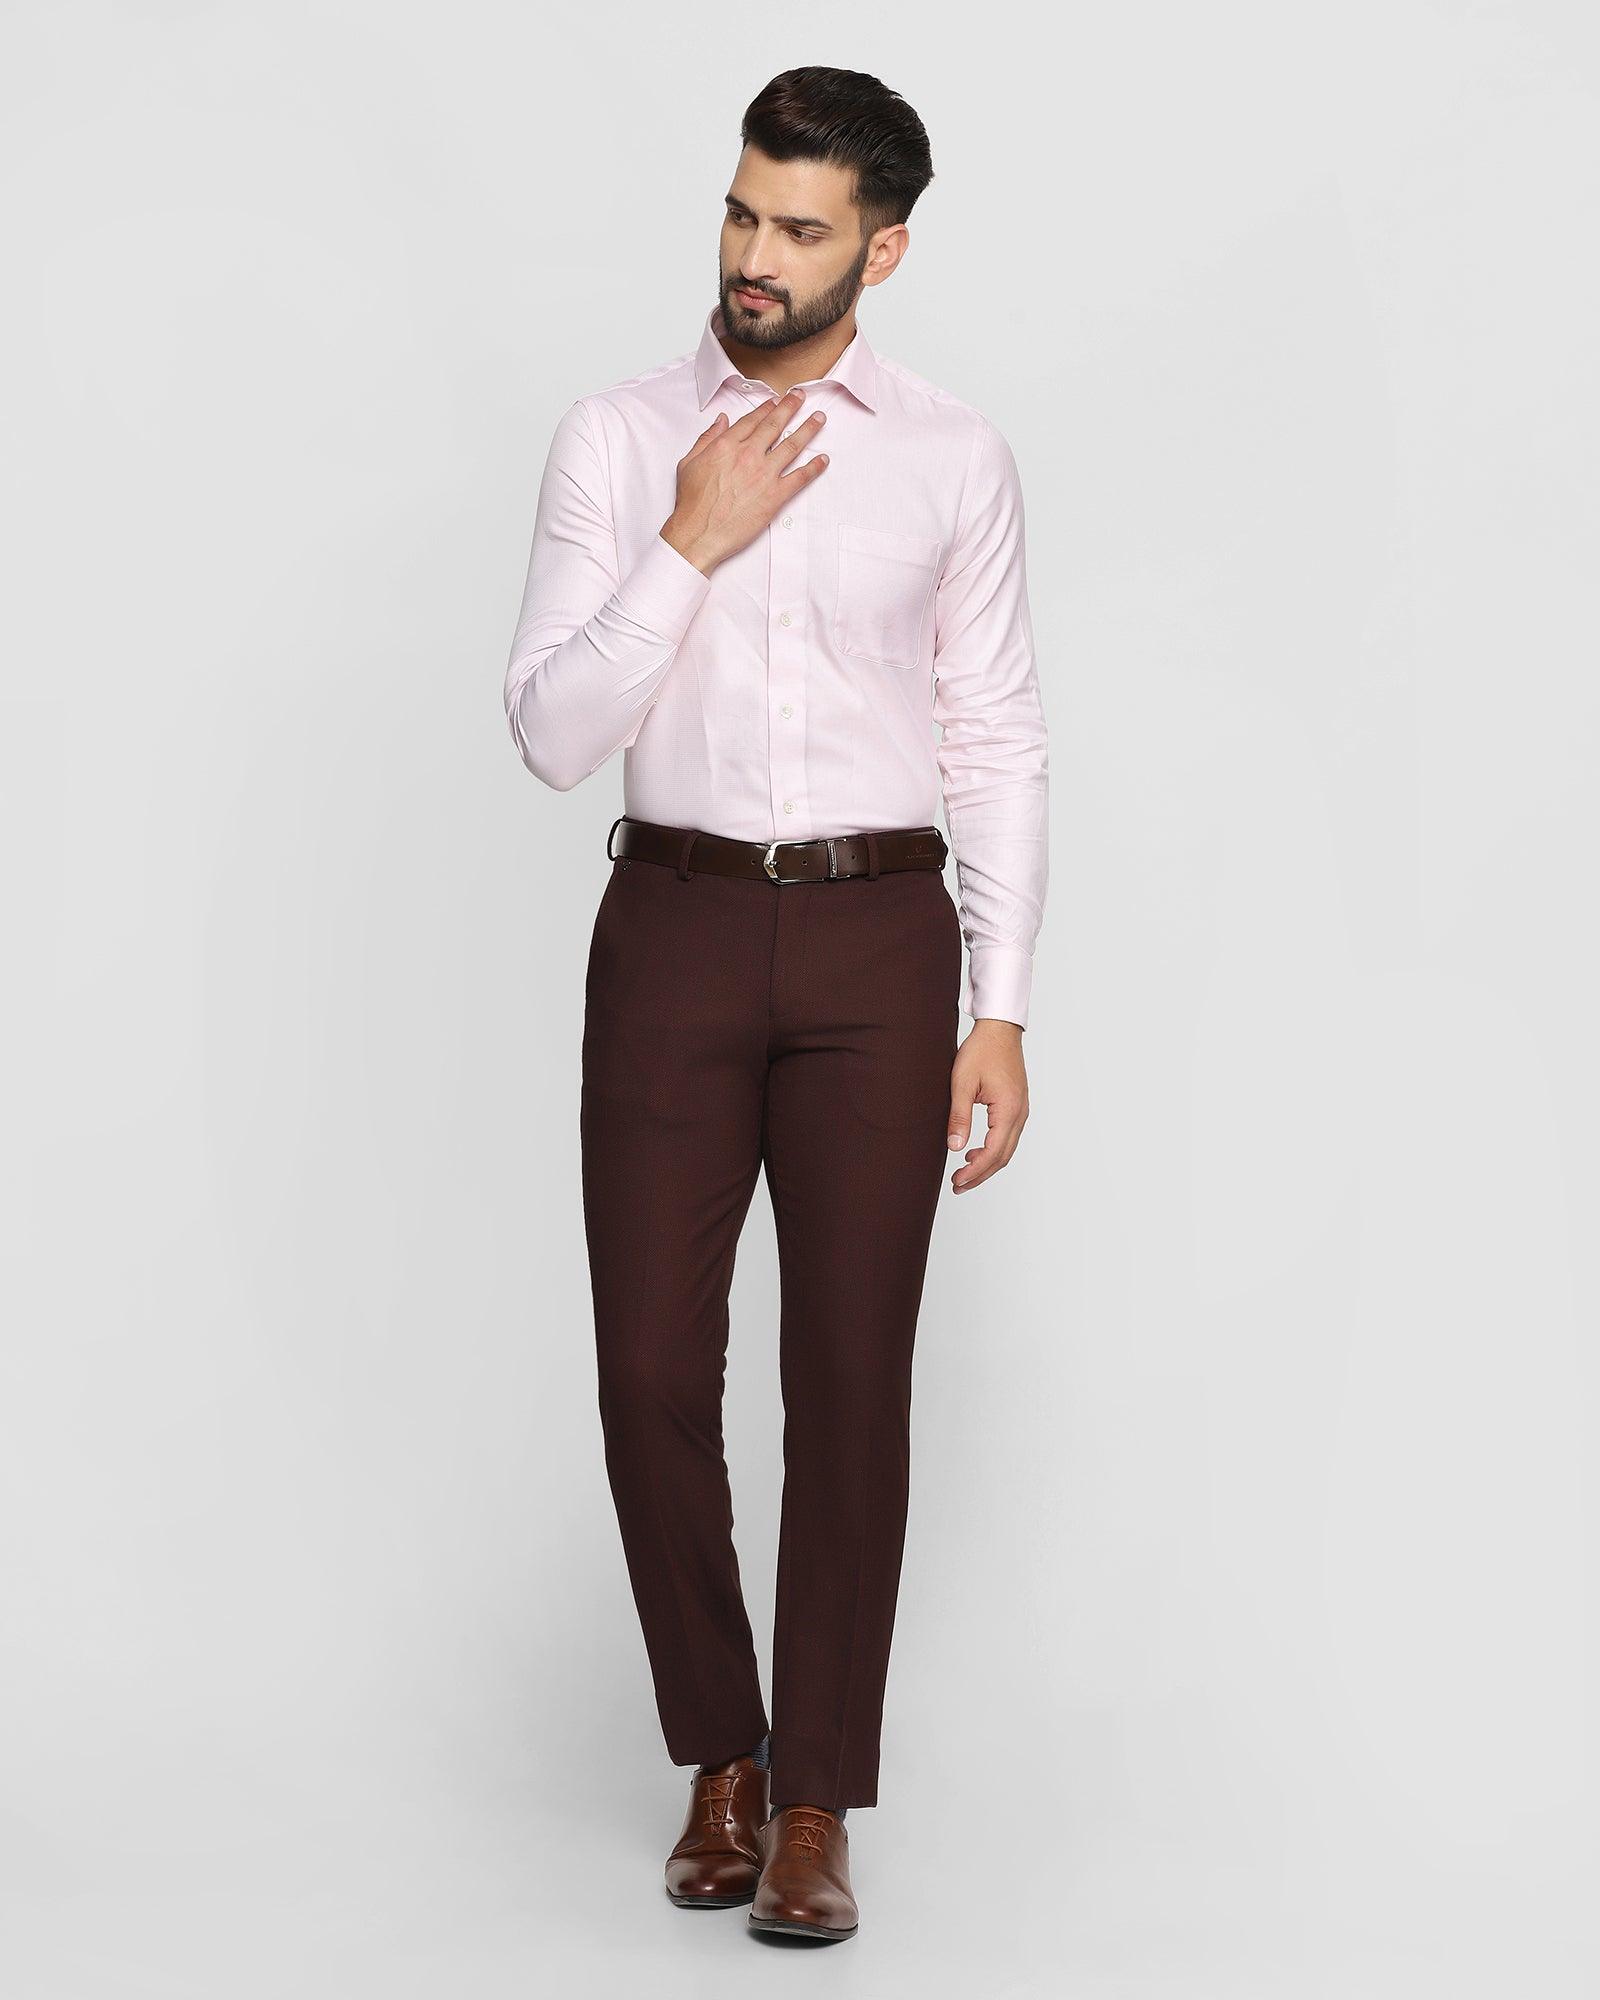 What colour shirts would go well with this dress pant? :  r/IndianFashionAddicts